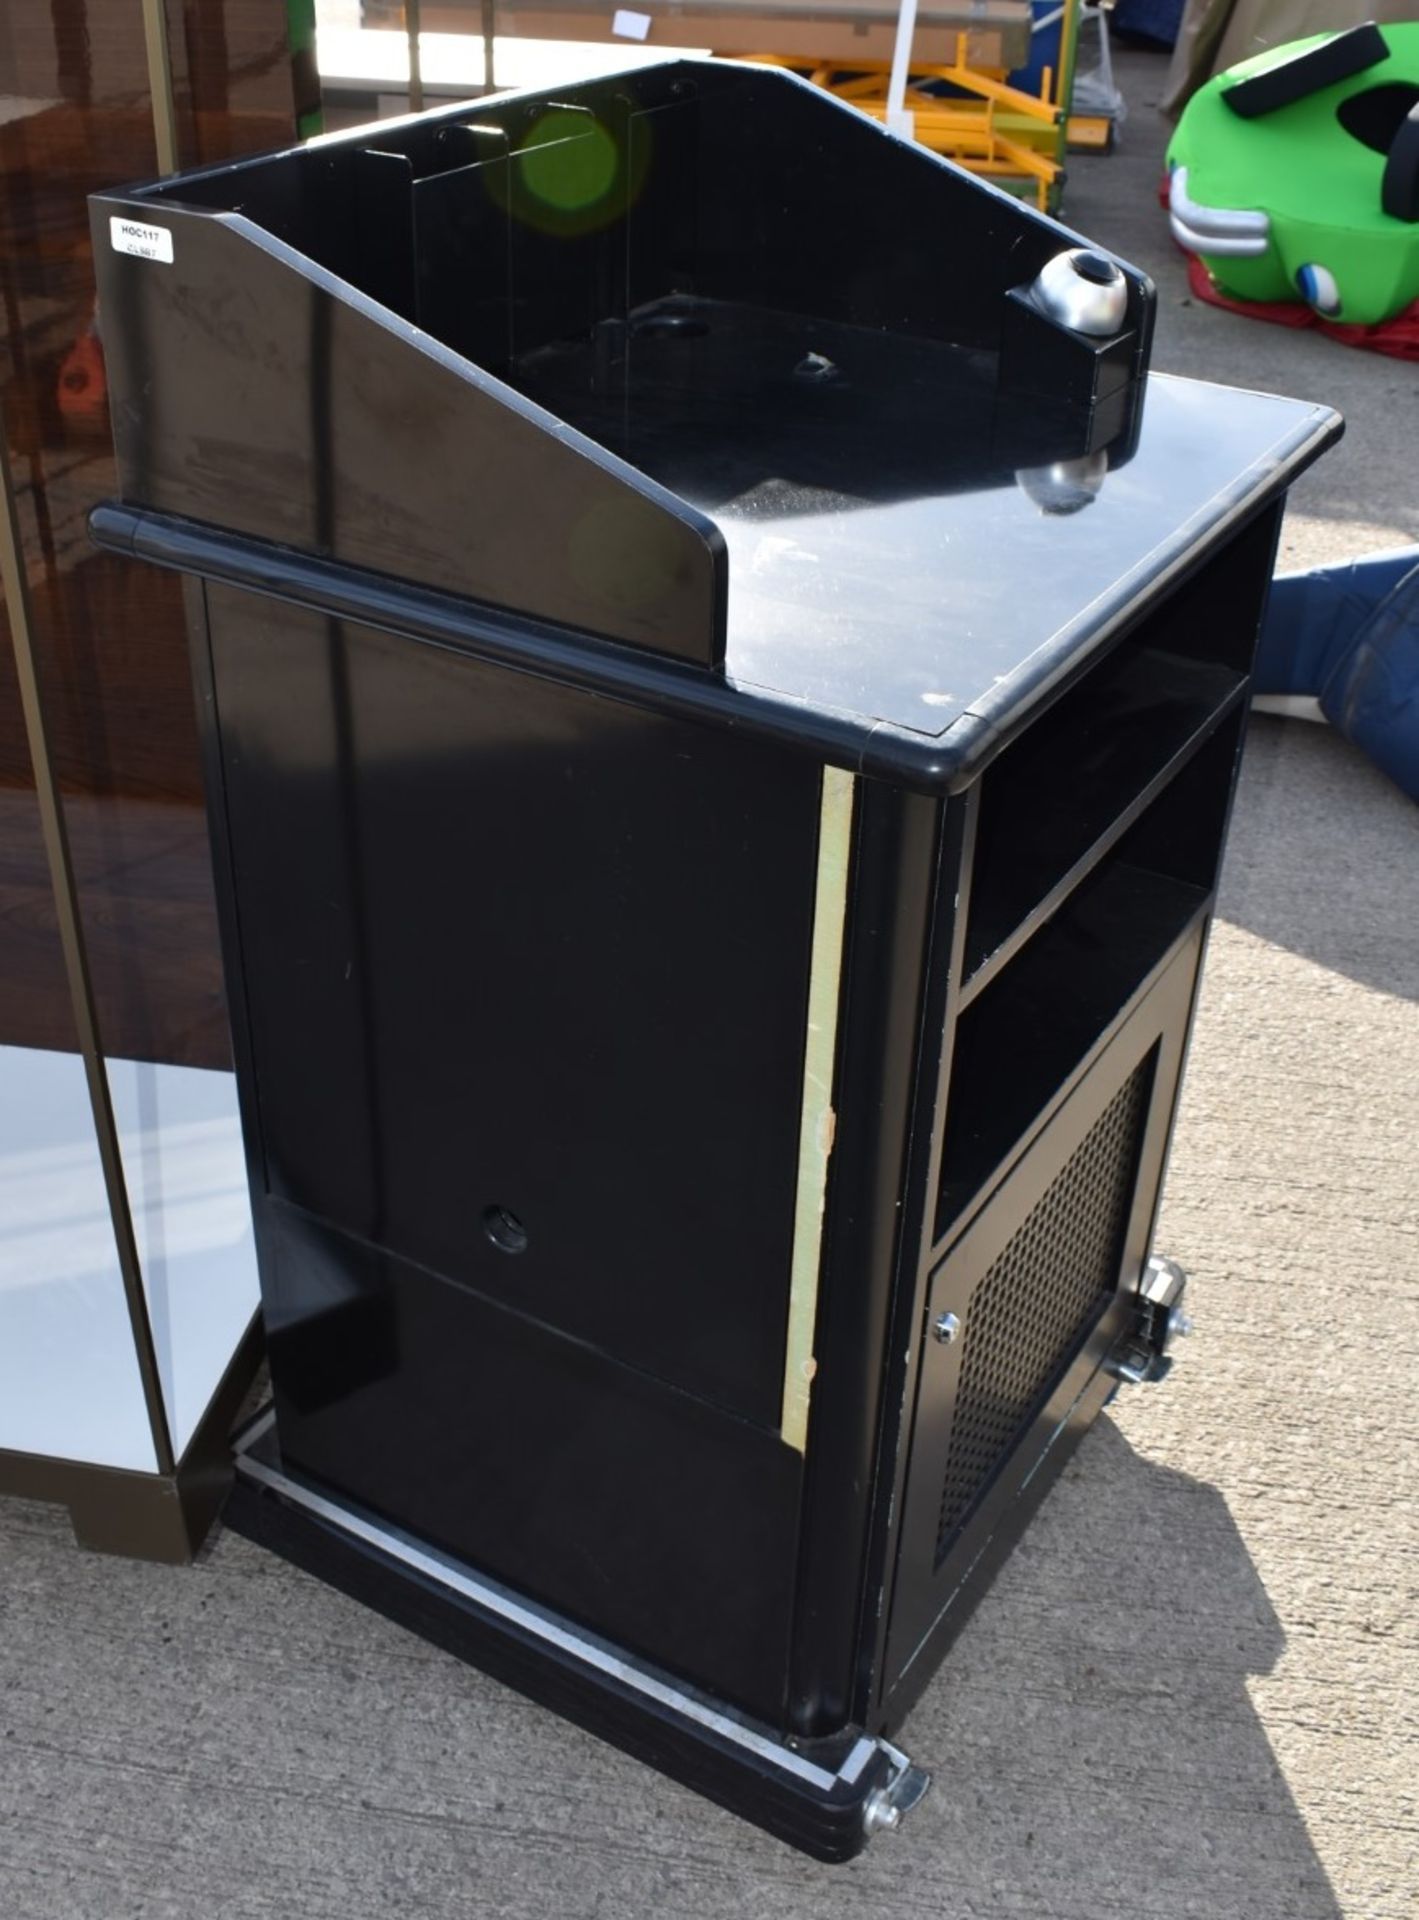 1 x Portable Mobile Sale Till Store Retail Counter Unit In Black, With Fold-out Sides - Image 4 of 4